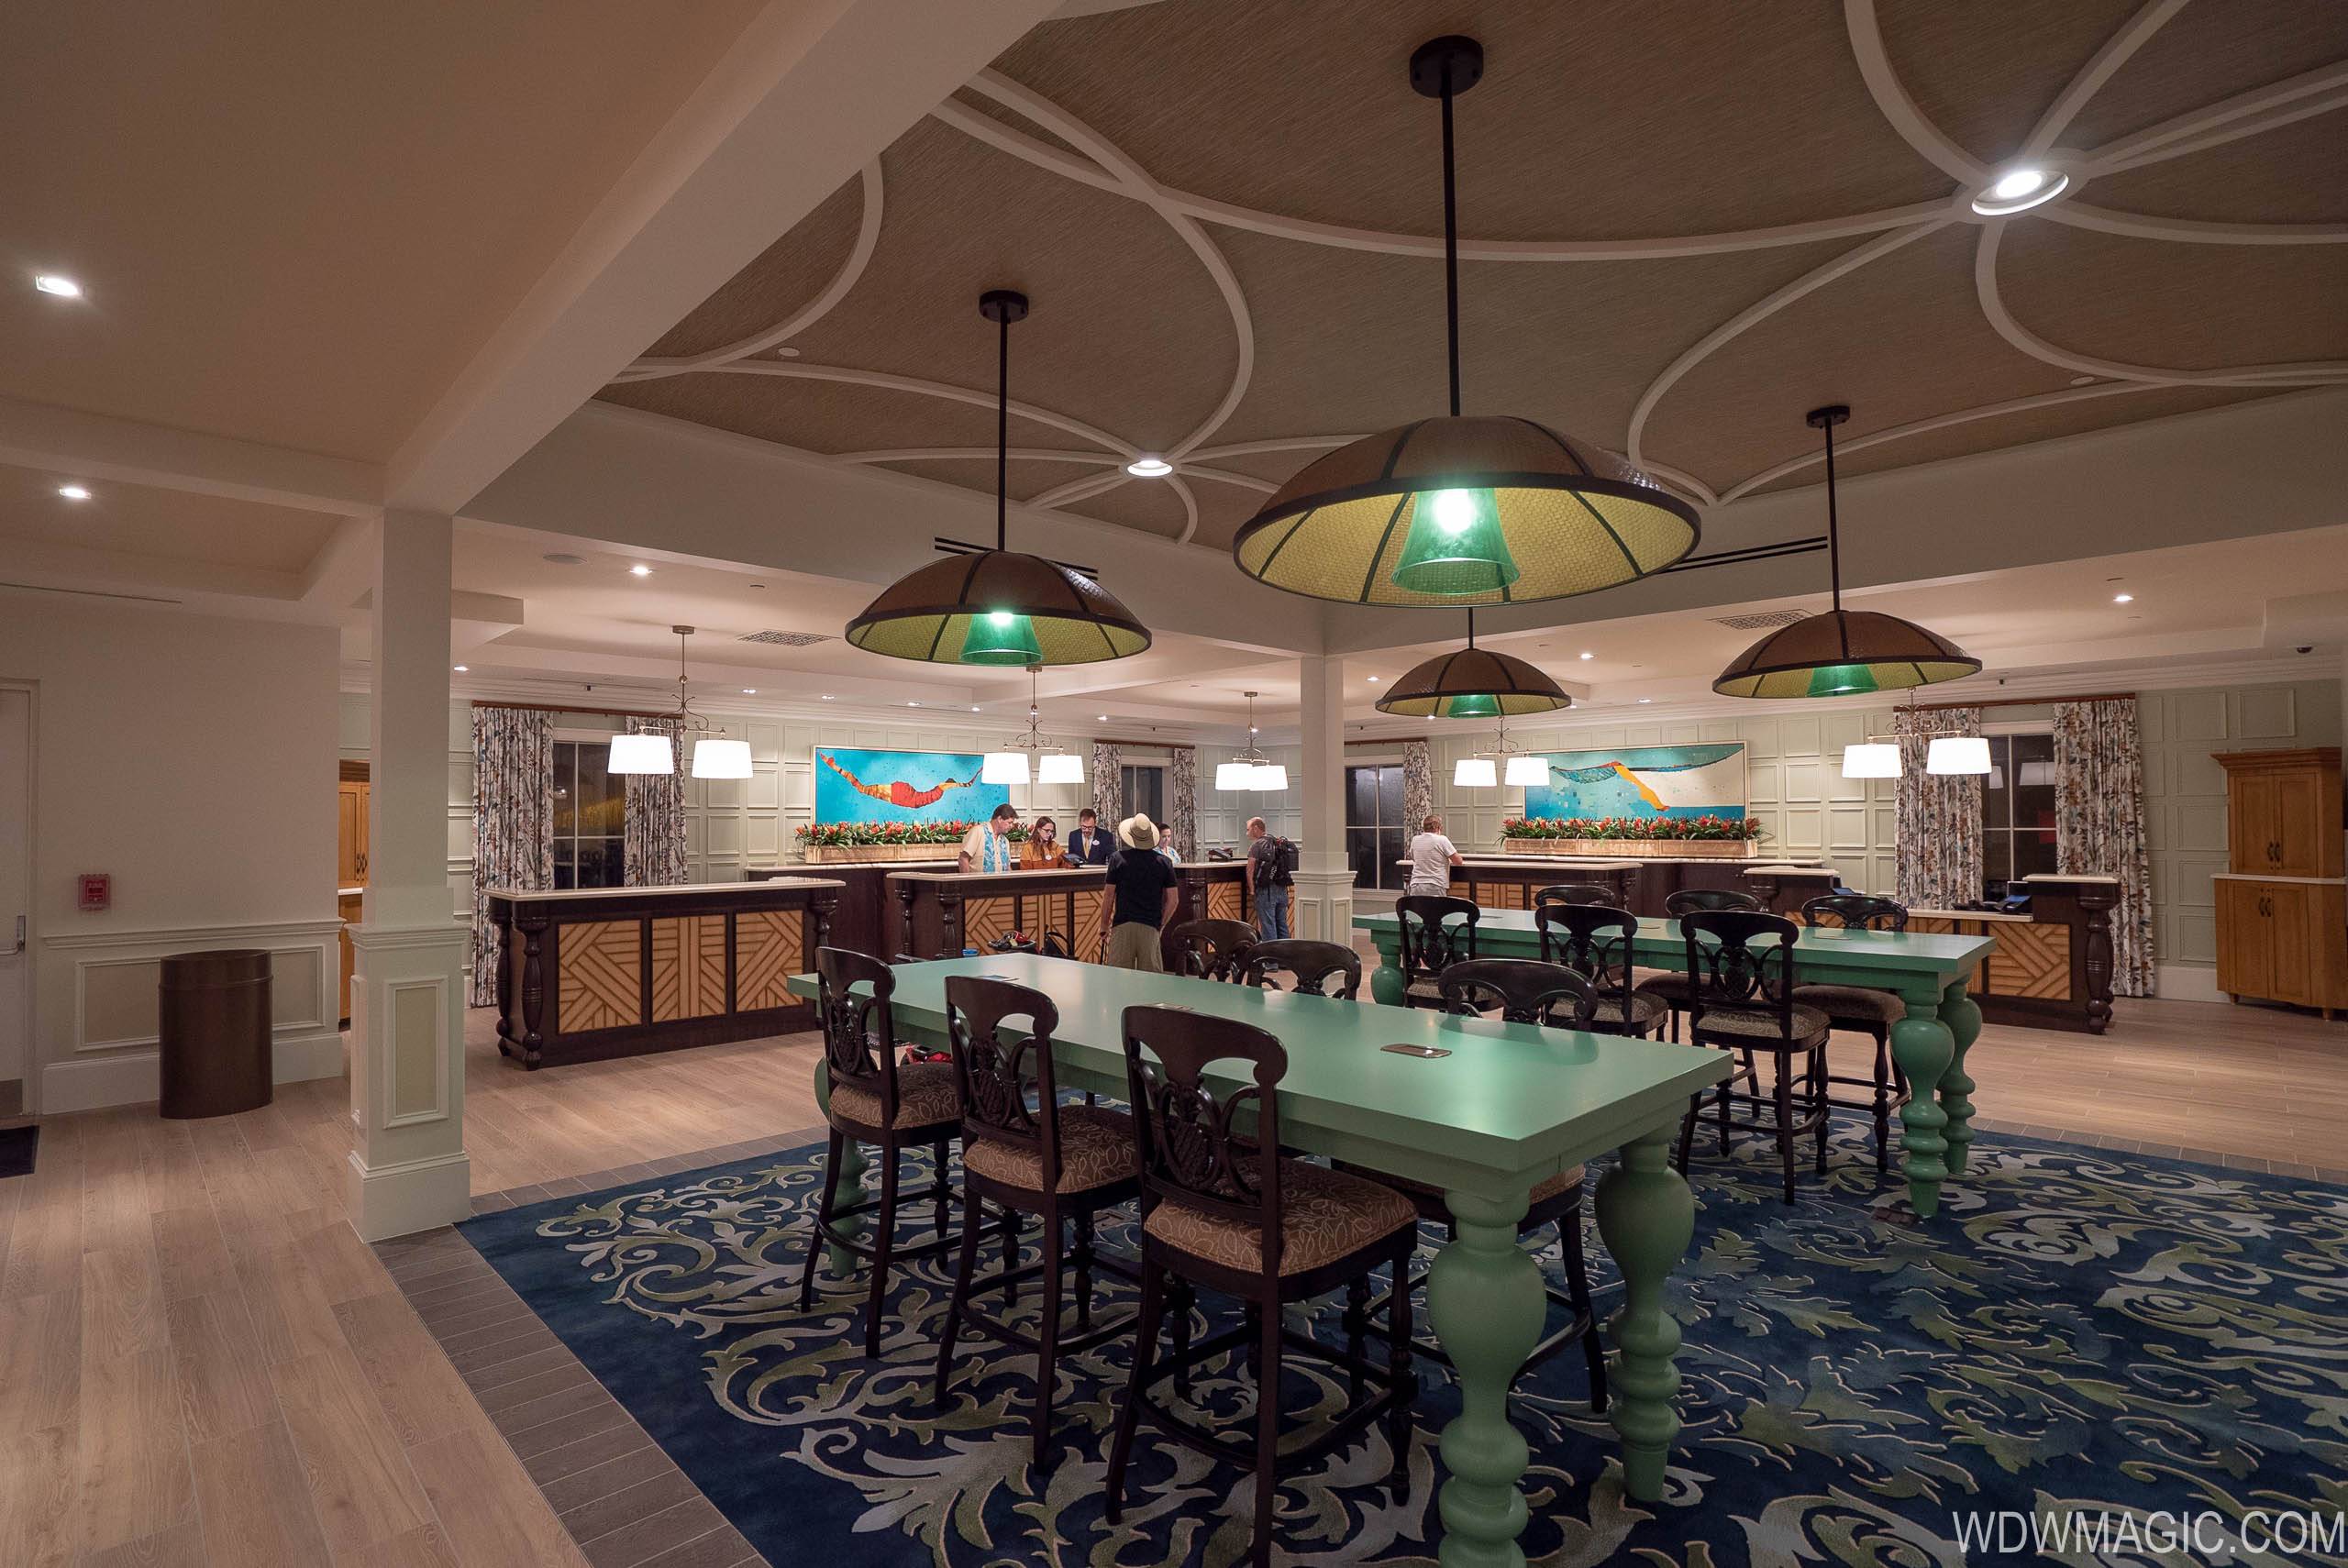 Caribbean Beach Resort was one of the first Disney resorts to move to free-flowing open check-in areas in 2018